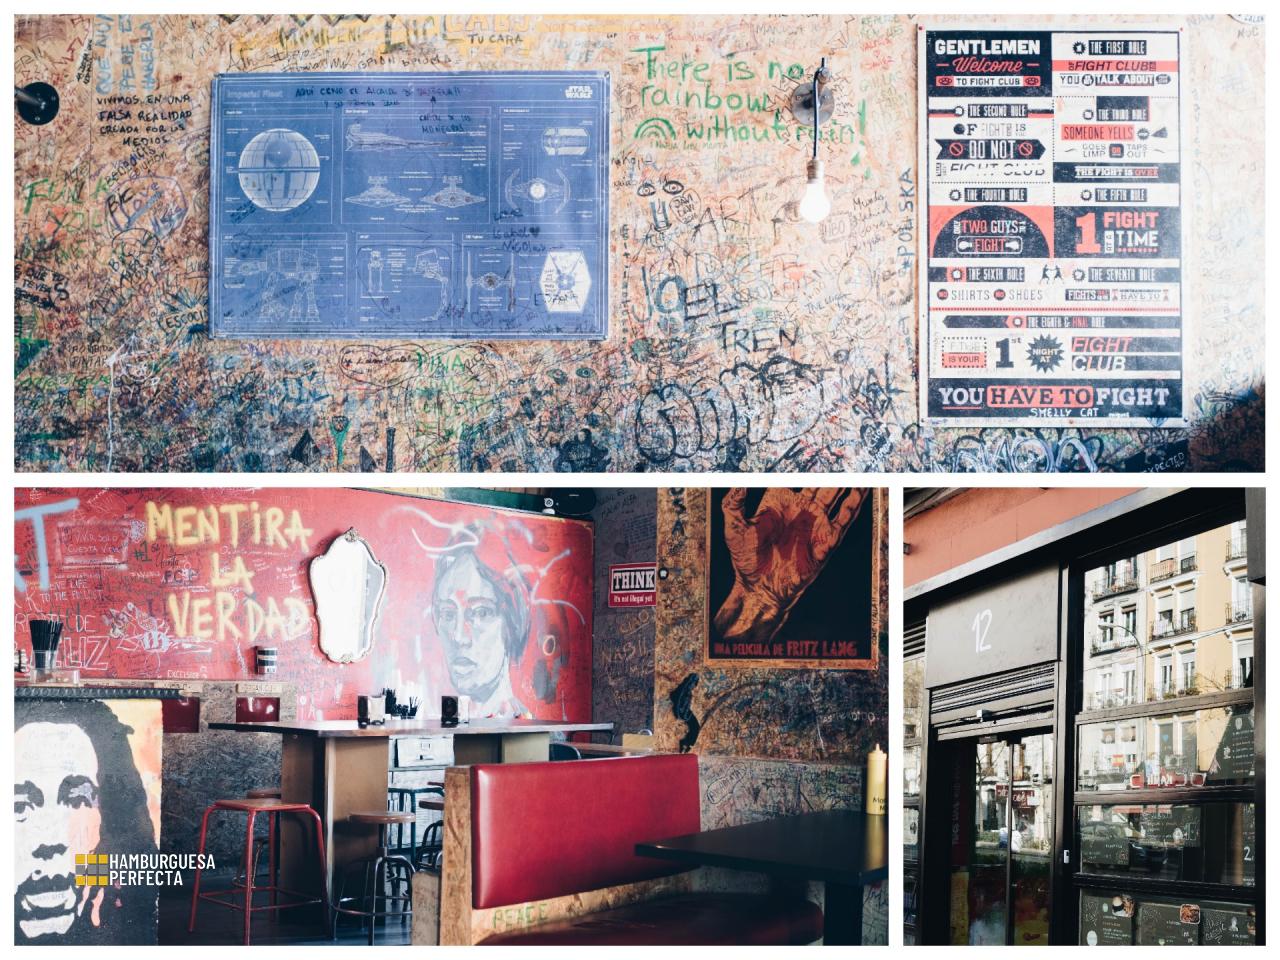 Collage ocal Burger Joint